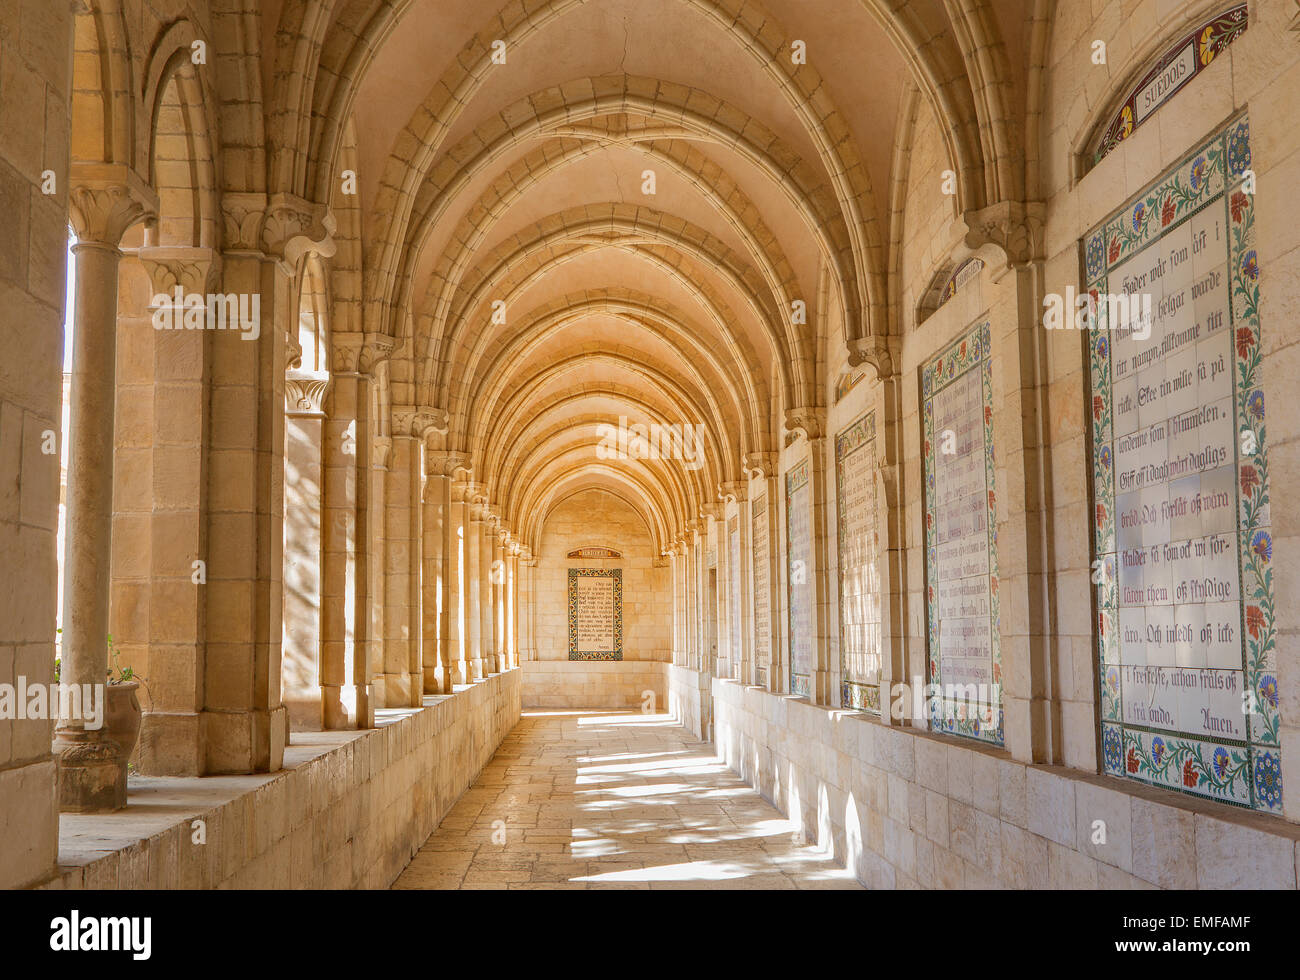 JERUSALEM, ISRAEL - MARCH 3, 2015: The gothic corridor of atrium in Church of the Pater Noster on Mount of Olives. Stock Photo